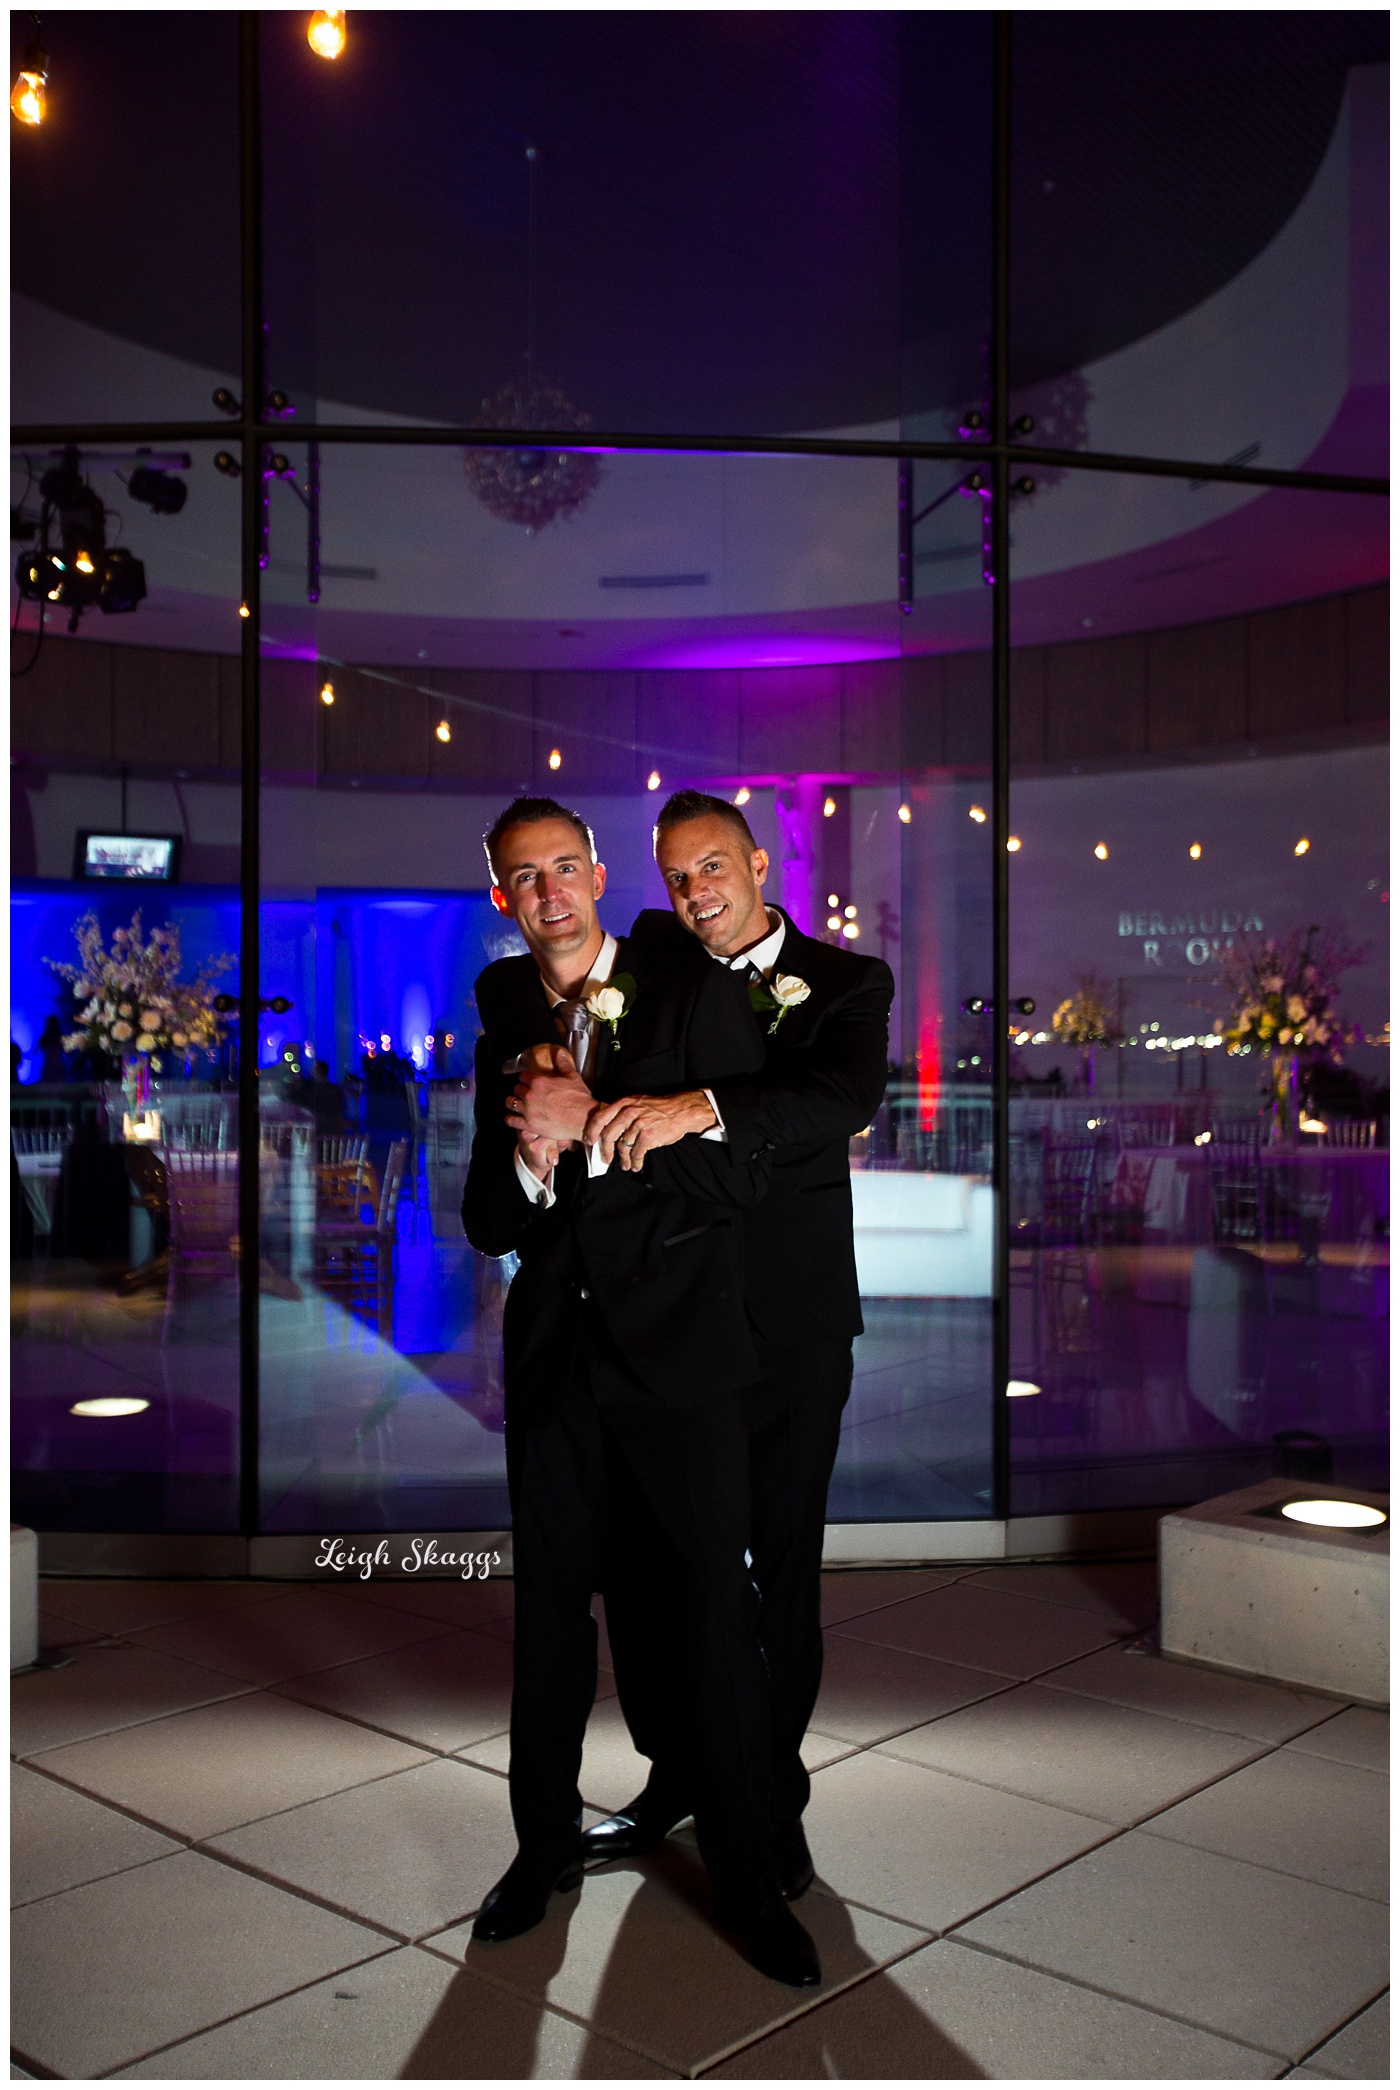 David and Tim are Married!  A sneak peek from the Half Moone